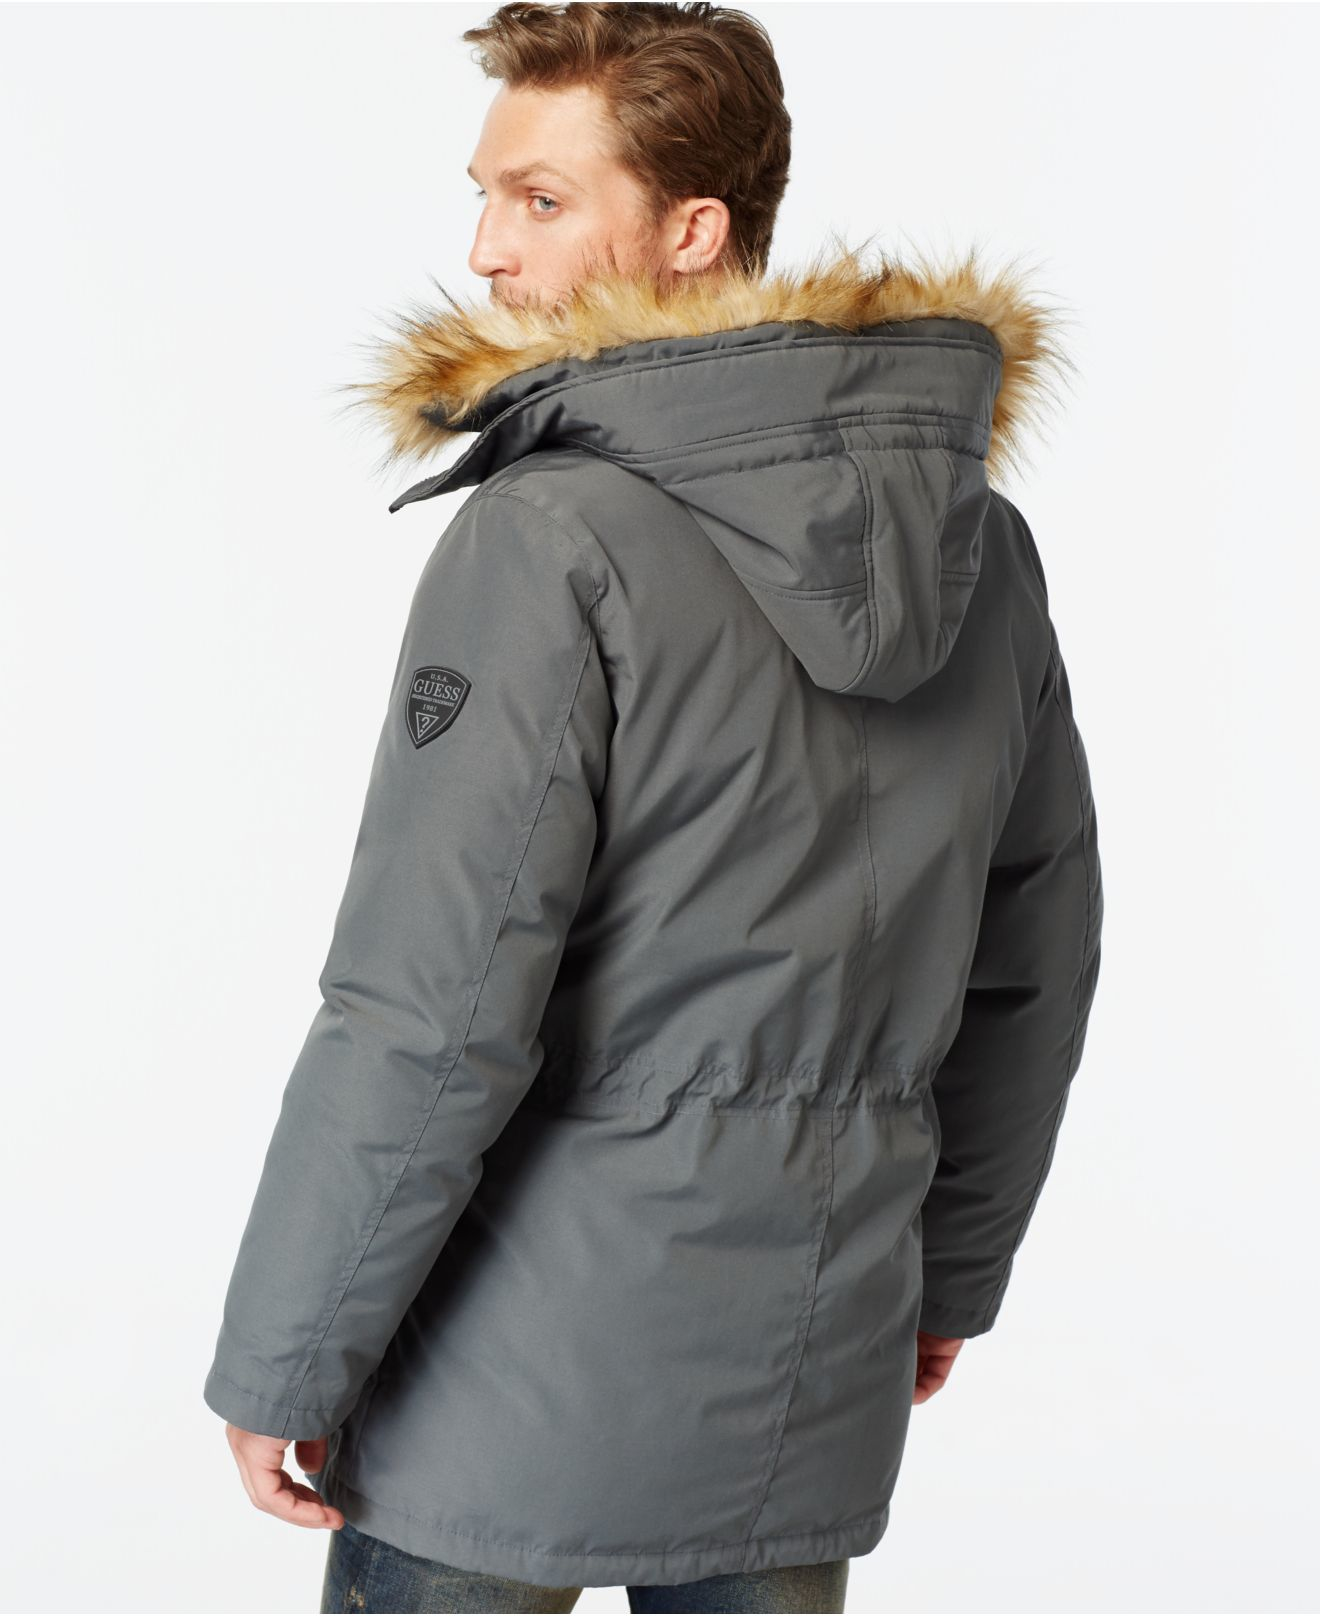 Lyst - Guess Hooded Snorkel Coat in Gray for Men